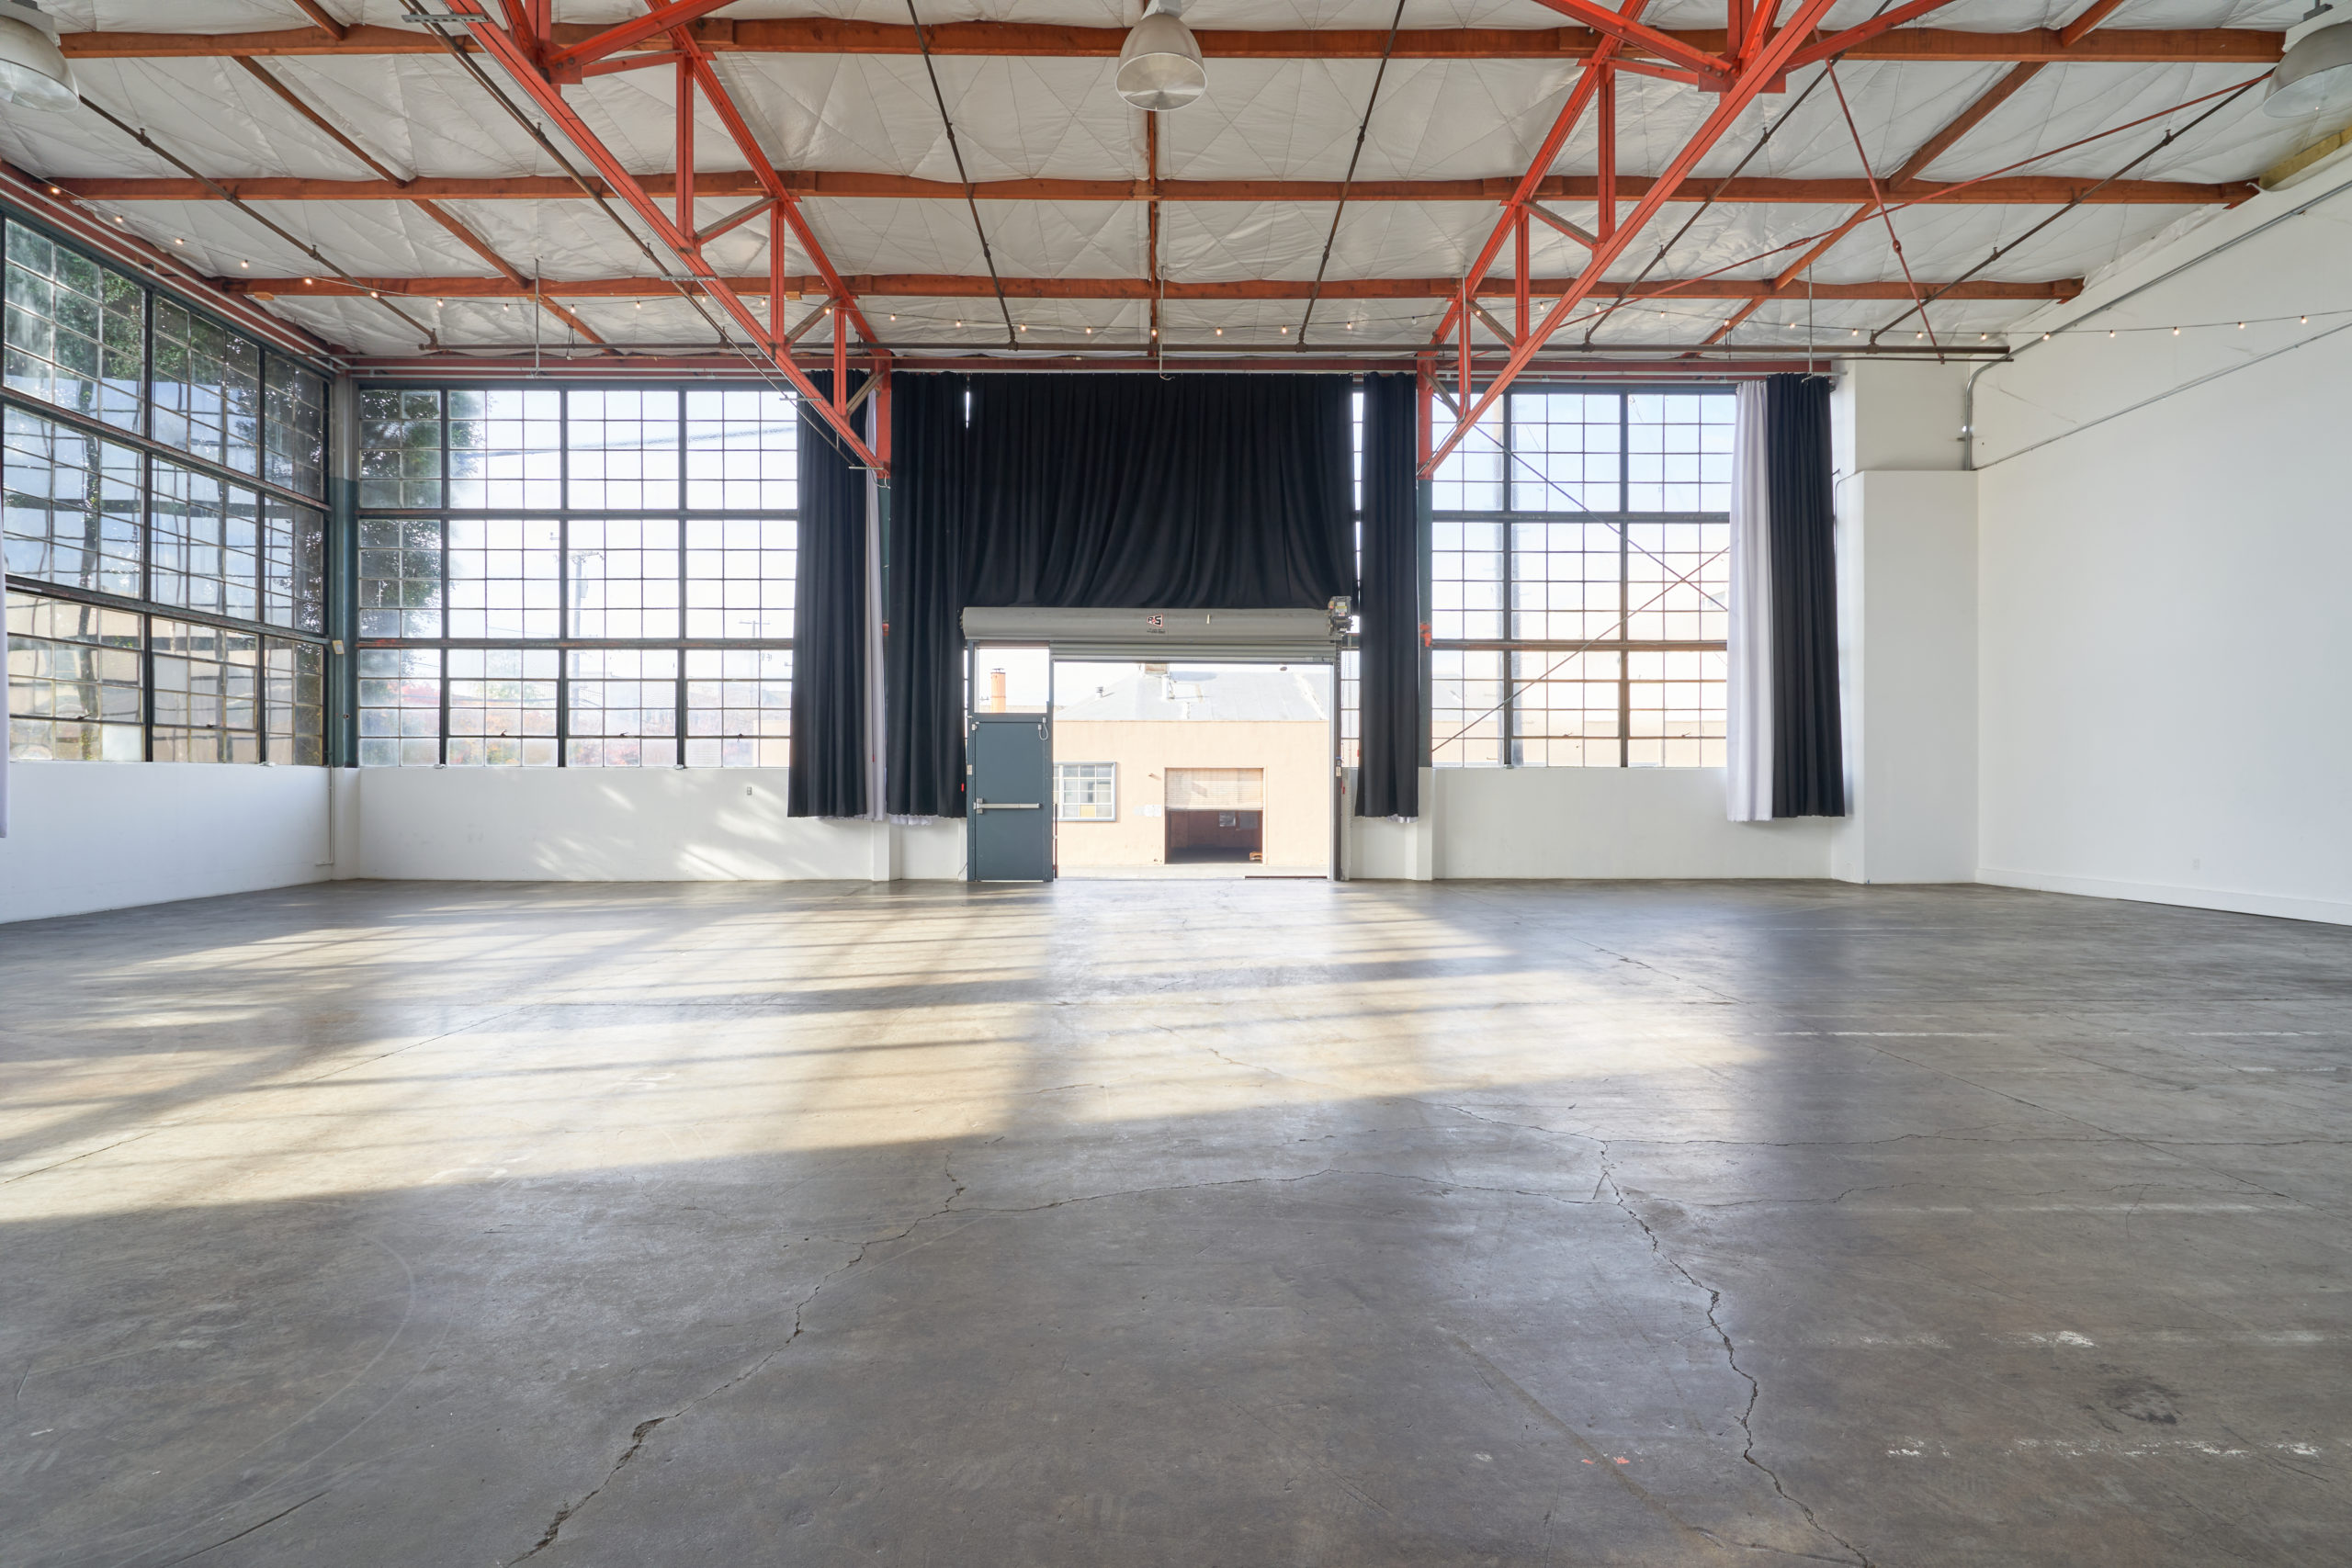 View of the private loading dock that leads into Studio 5. The loading dock is surrounded by walls of windows with blackout curtains and there are orange beams on the ceiling inside a multiple set studio rental Berkeley creatives love.